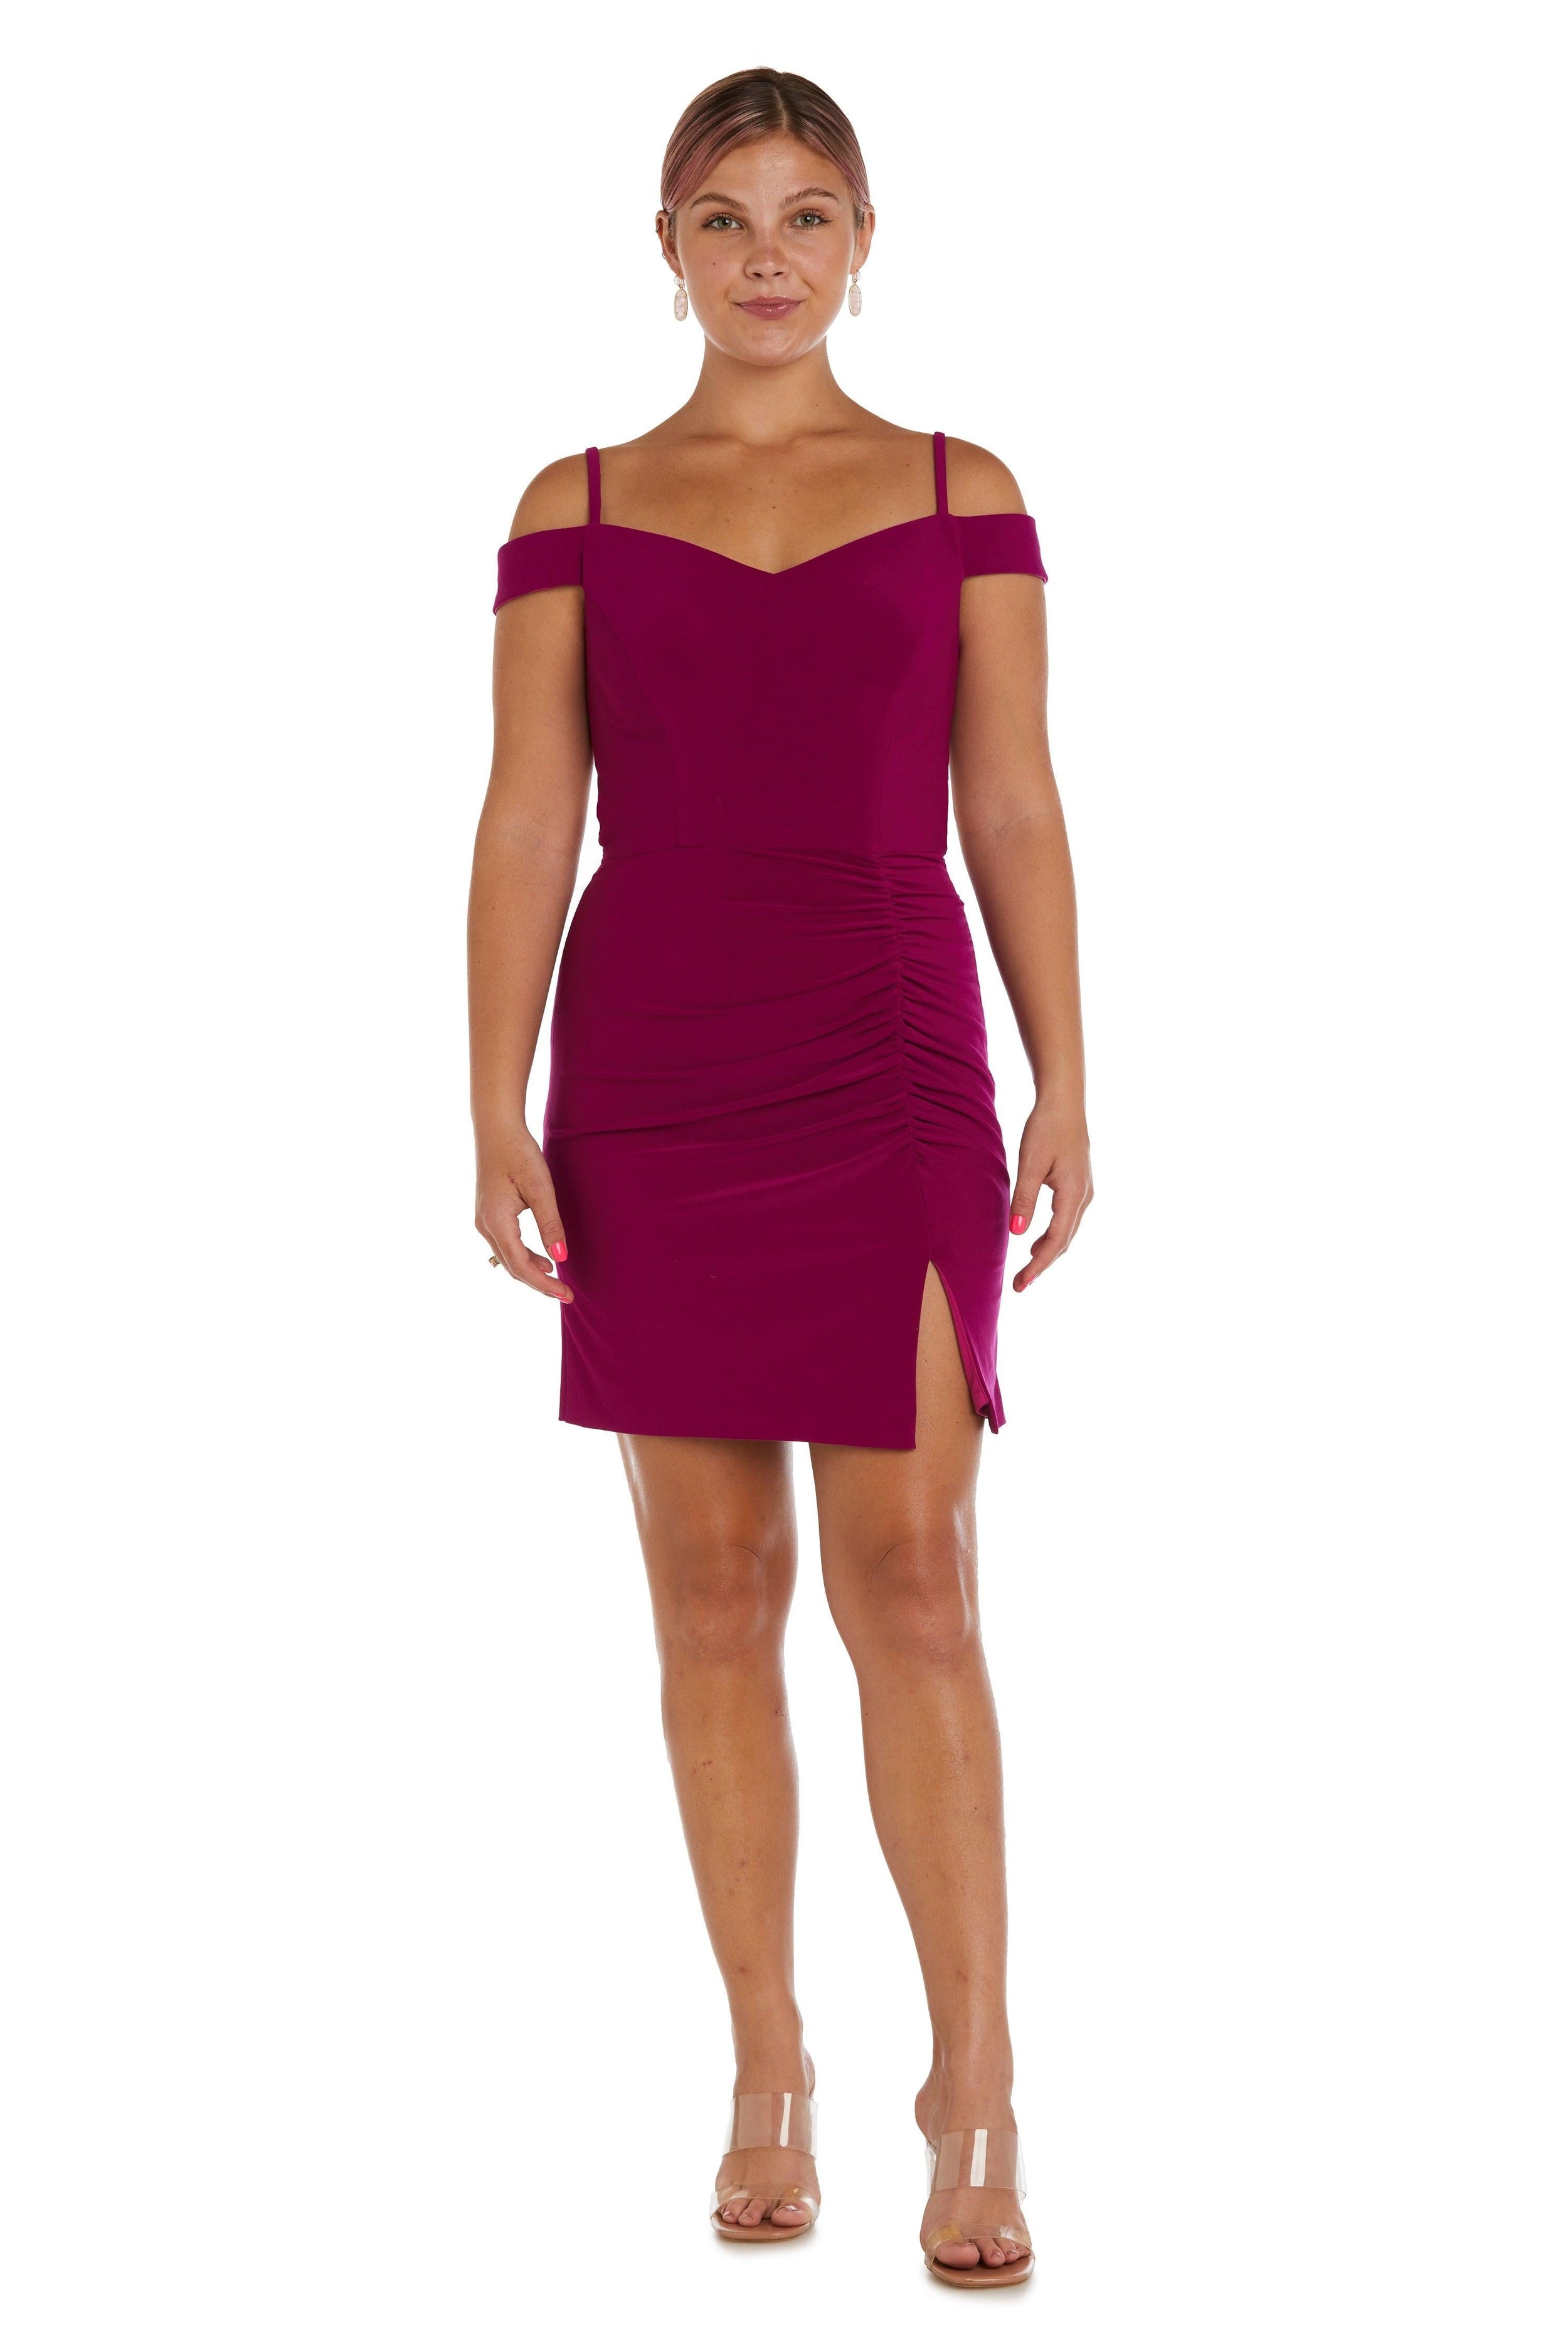 Morgan & Co Fitted Short Cocktail Dress 13043 - The Dress Outlet